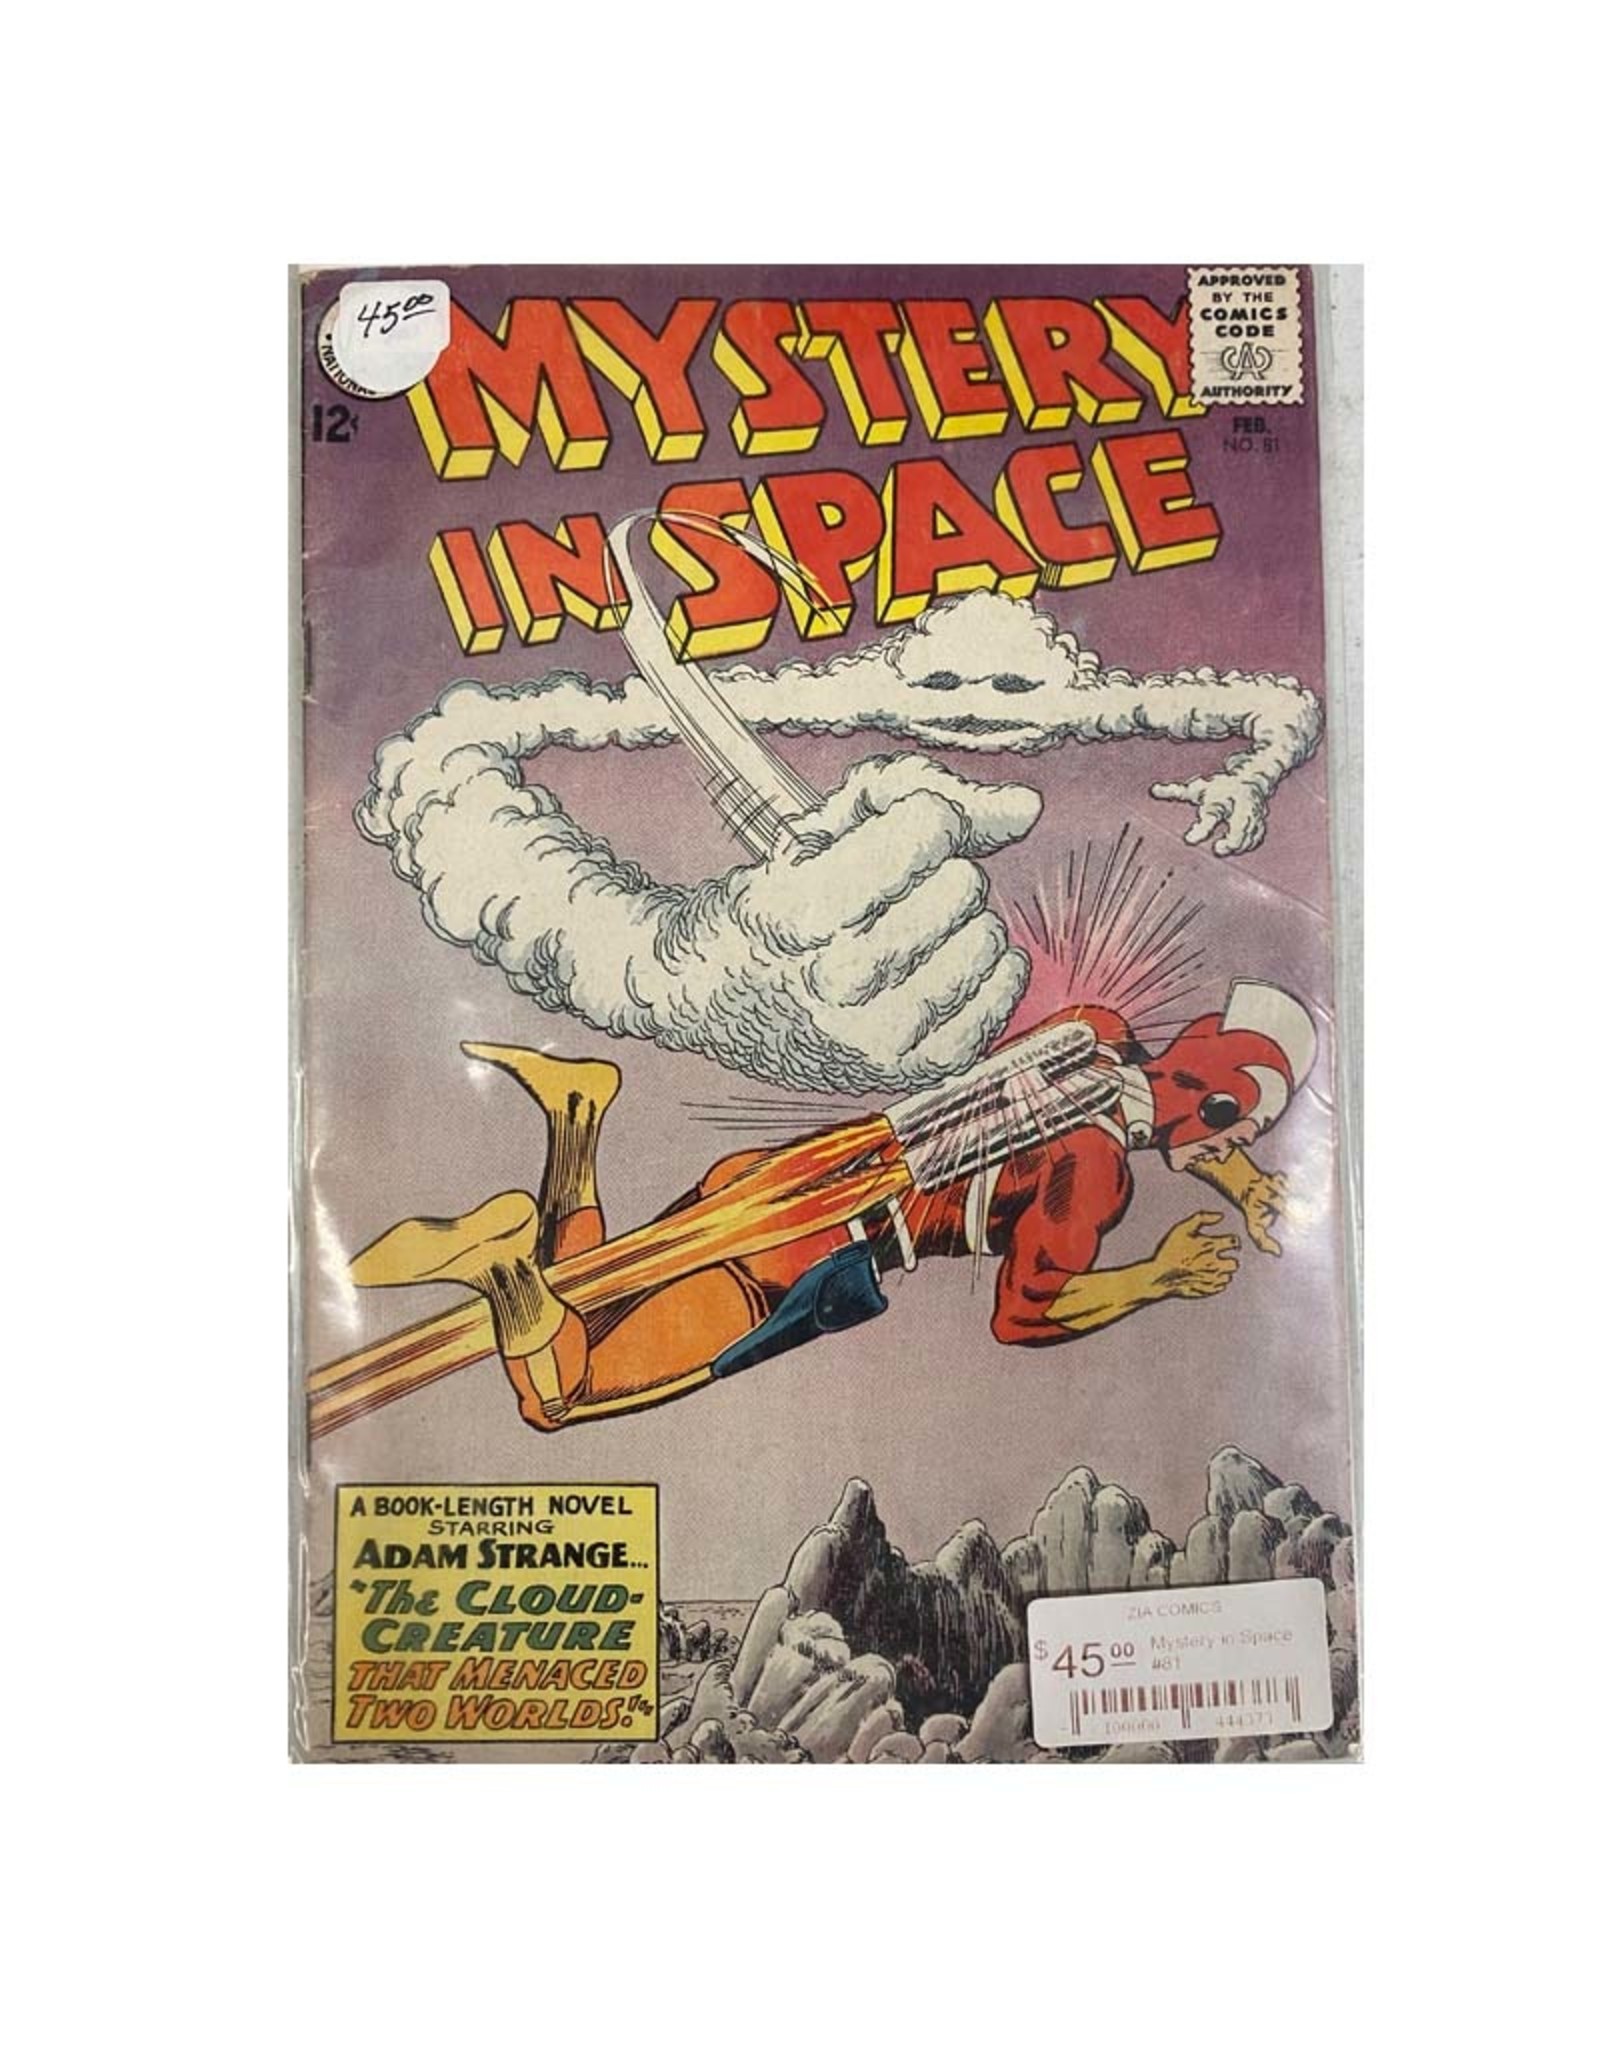 DC Comics Mystery in Space #81